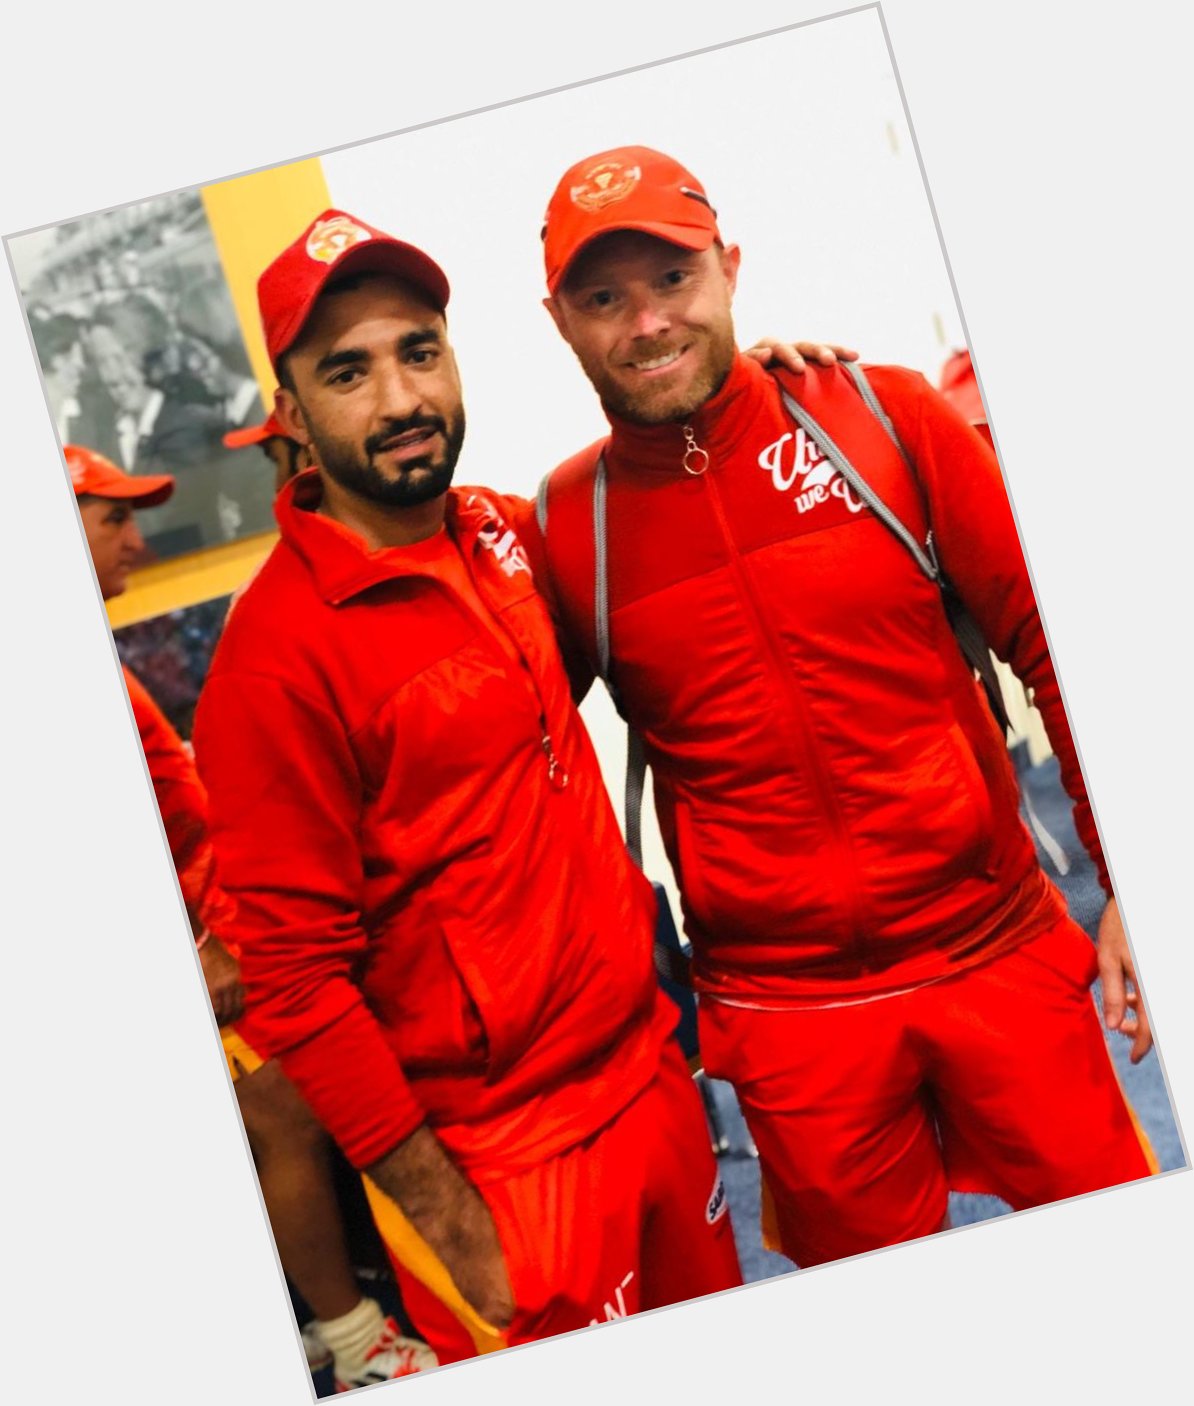 Happy birthday the most amazing teammate I have had. Brilliant cricketer, great person. 